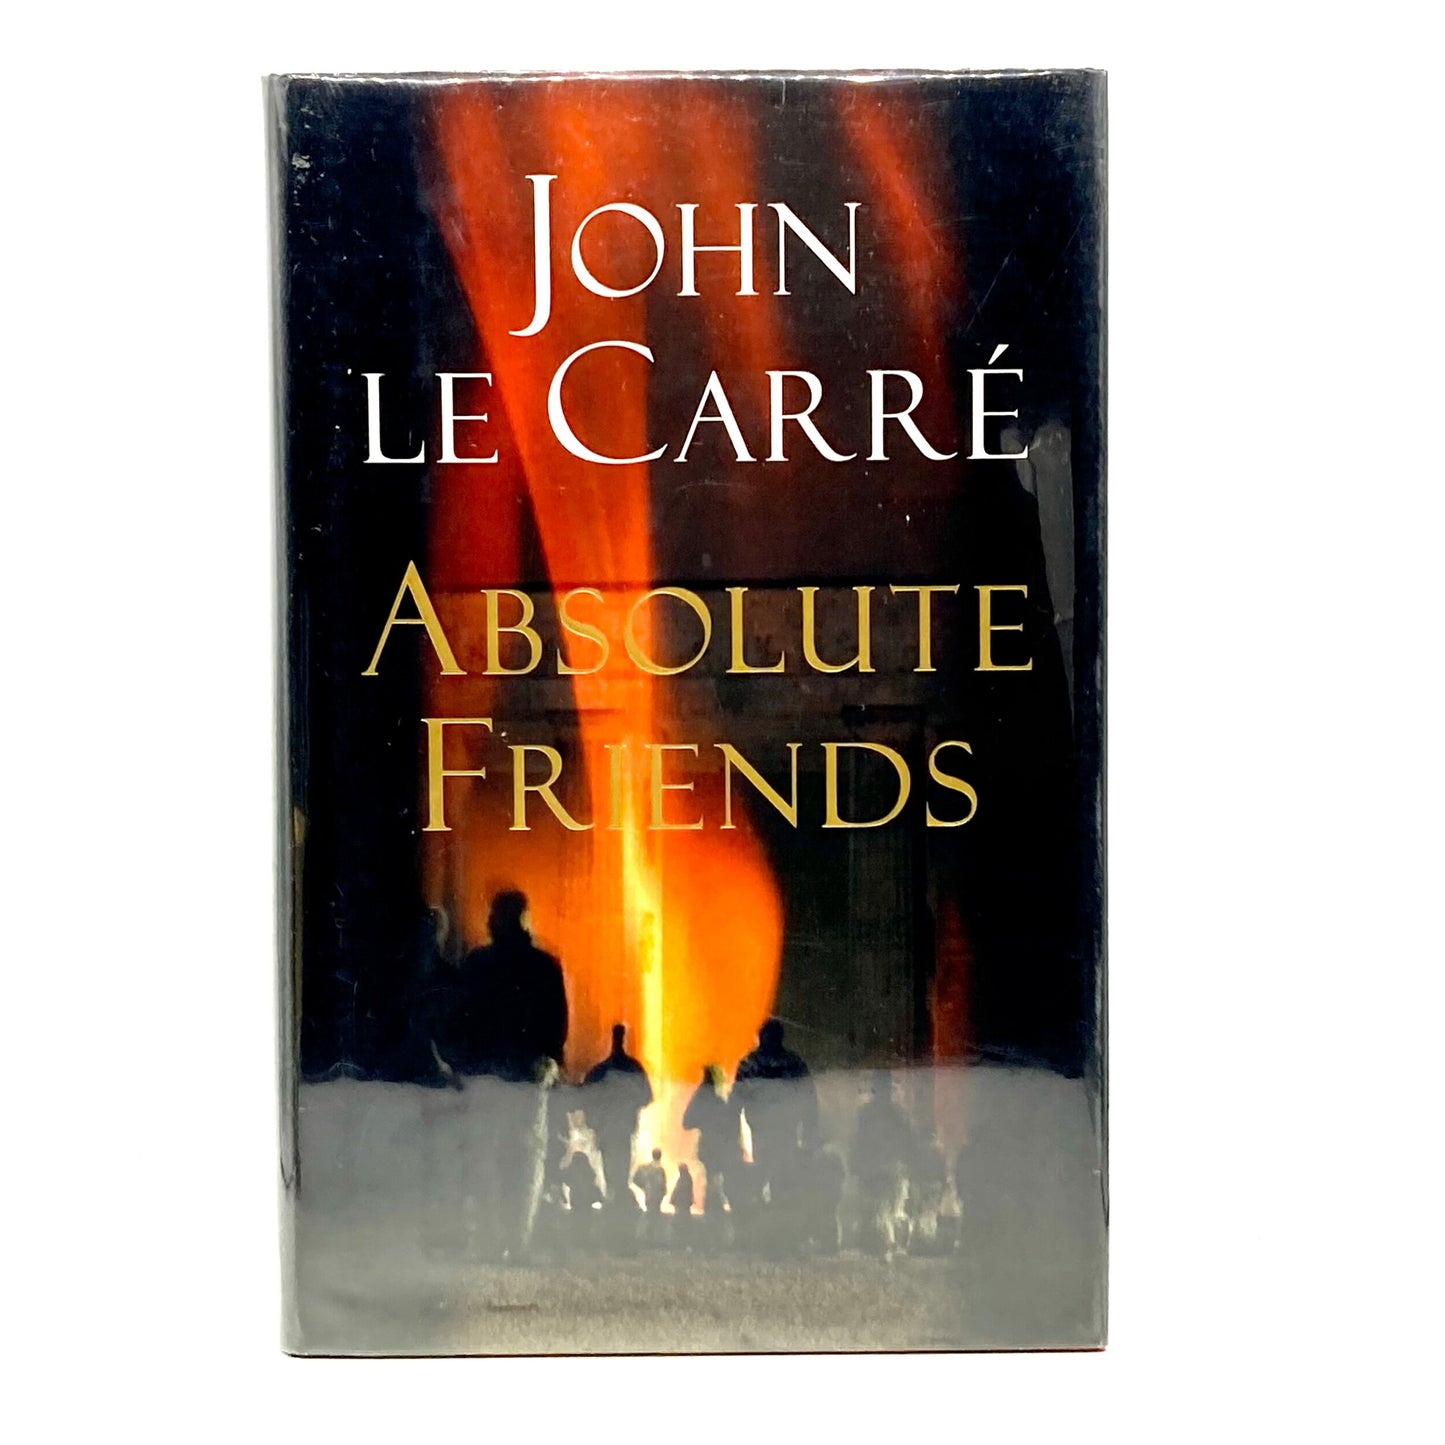 LE CARRE, John "Absolute Friends" [Little, Brown & Co, 2003] 1st Edition (Signed) - Buzz Bookstore